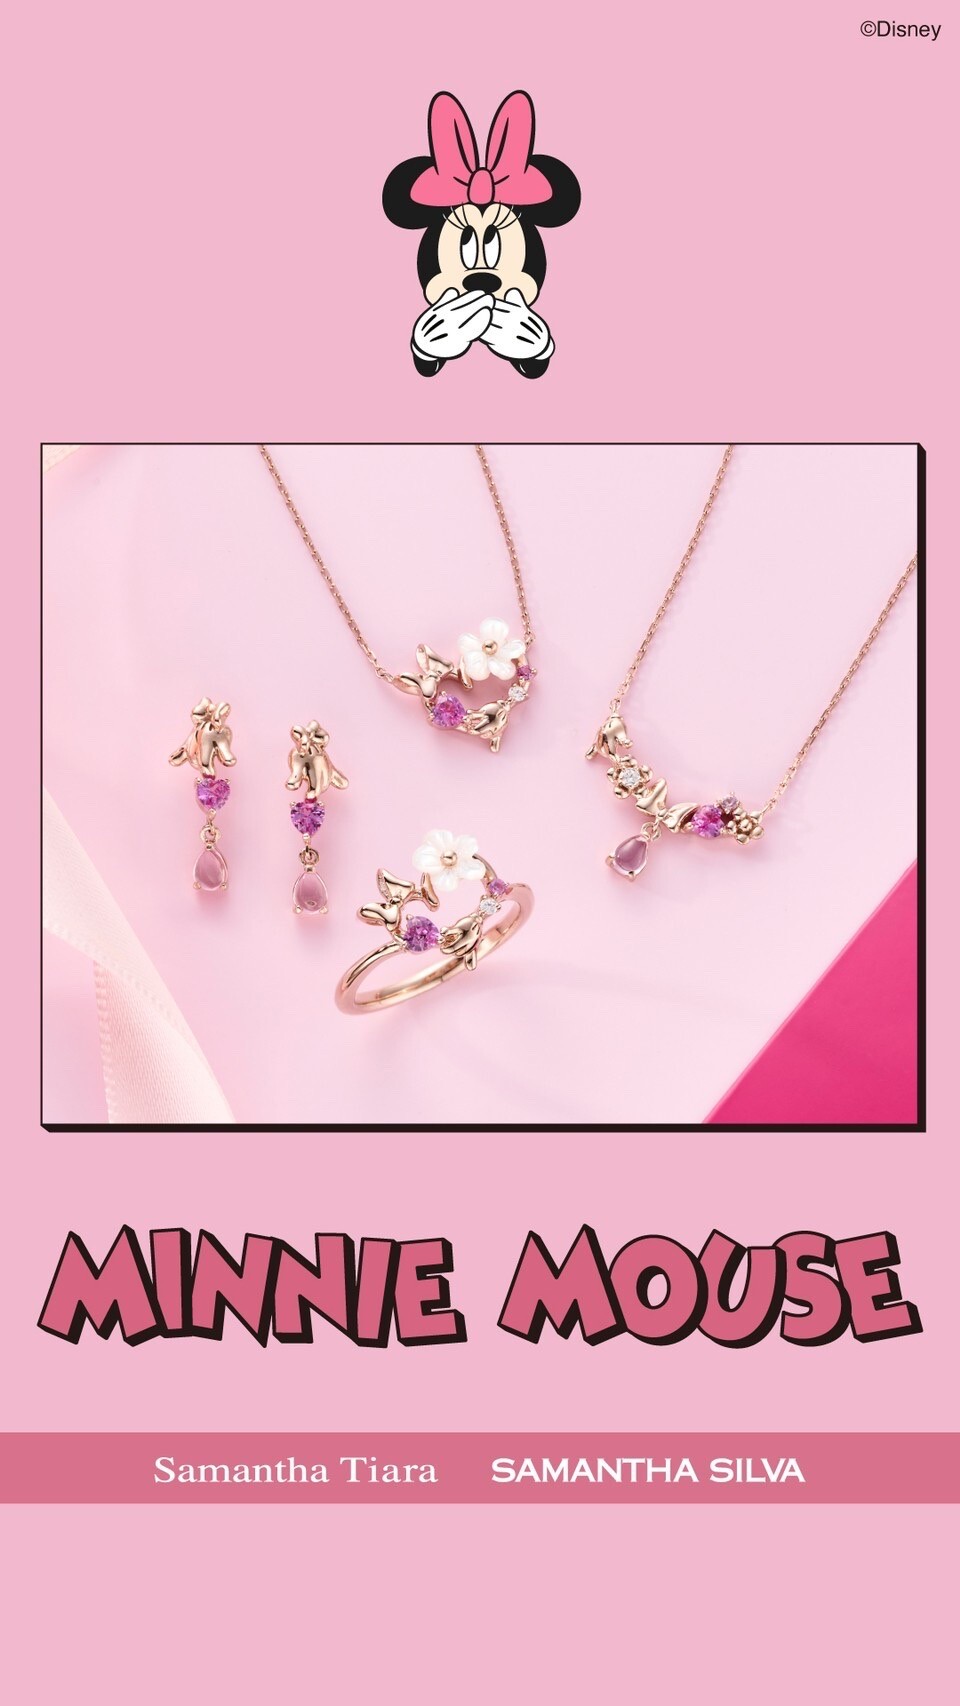 ♡Disney Collection “Minnie mouse” ♡